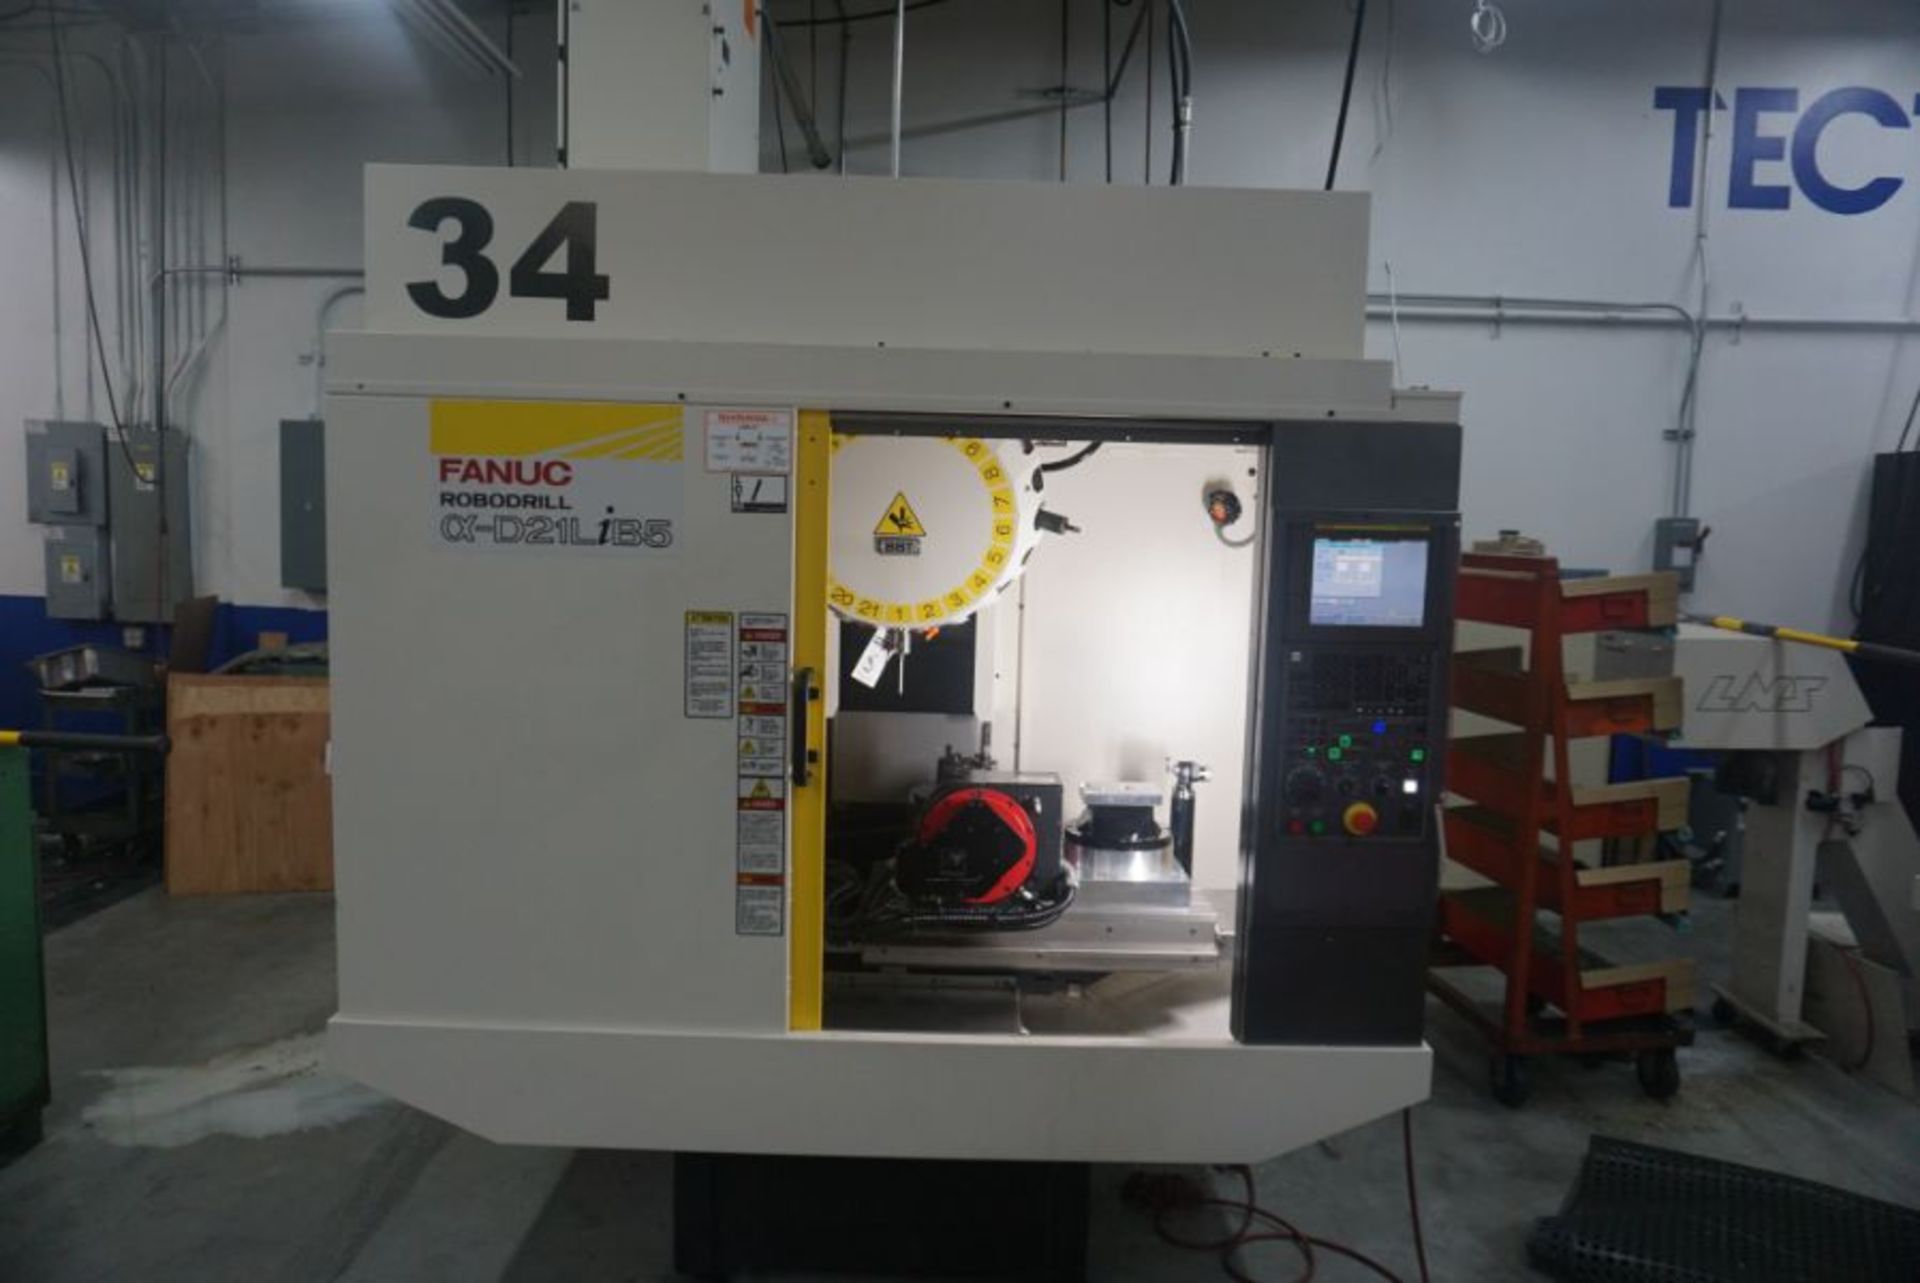 Fanuc Robodrill D21LiB5 5-Axis Vertical Machining Center, New 2018 *with Lots 2 & 3*